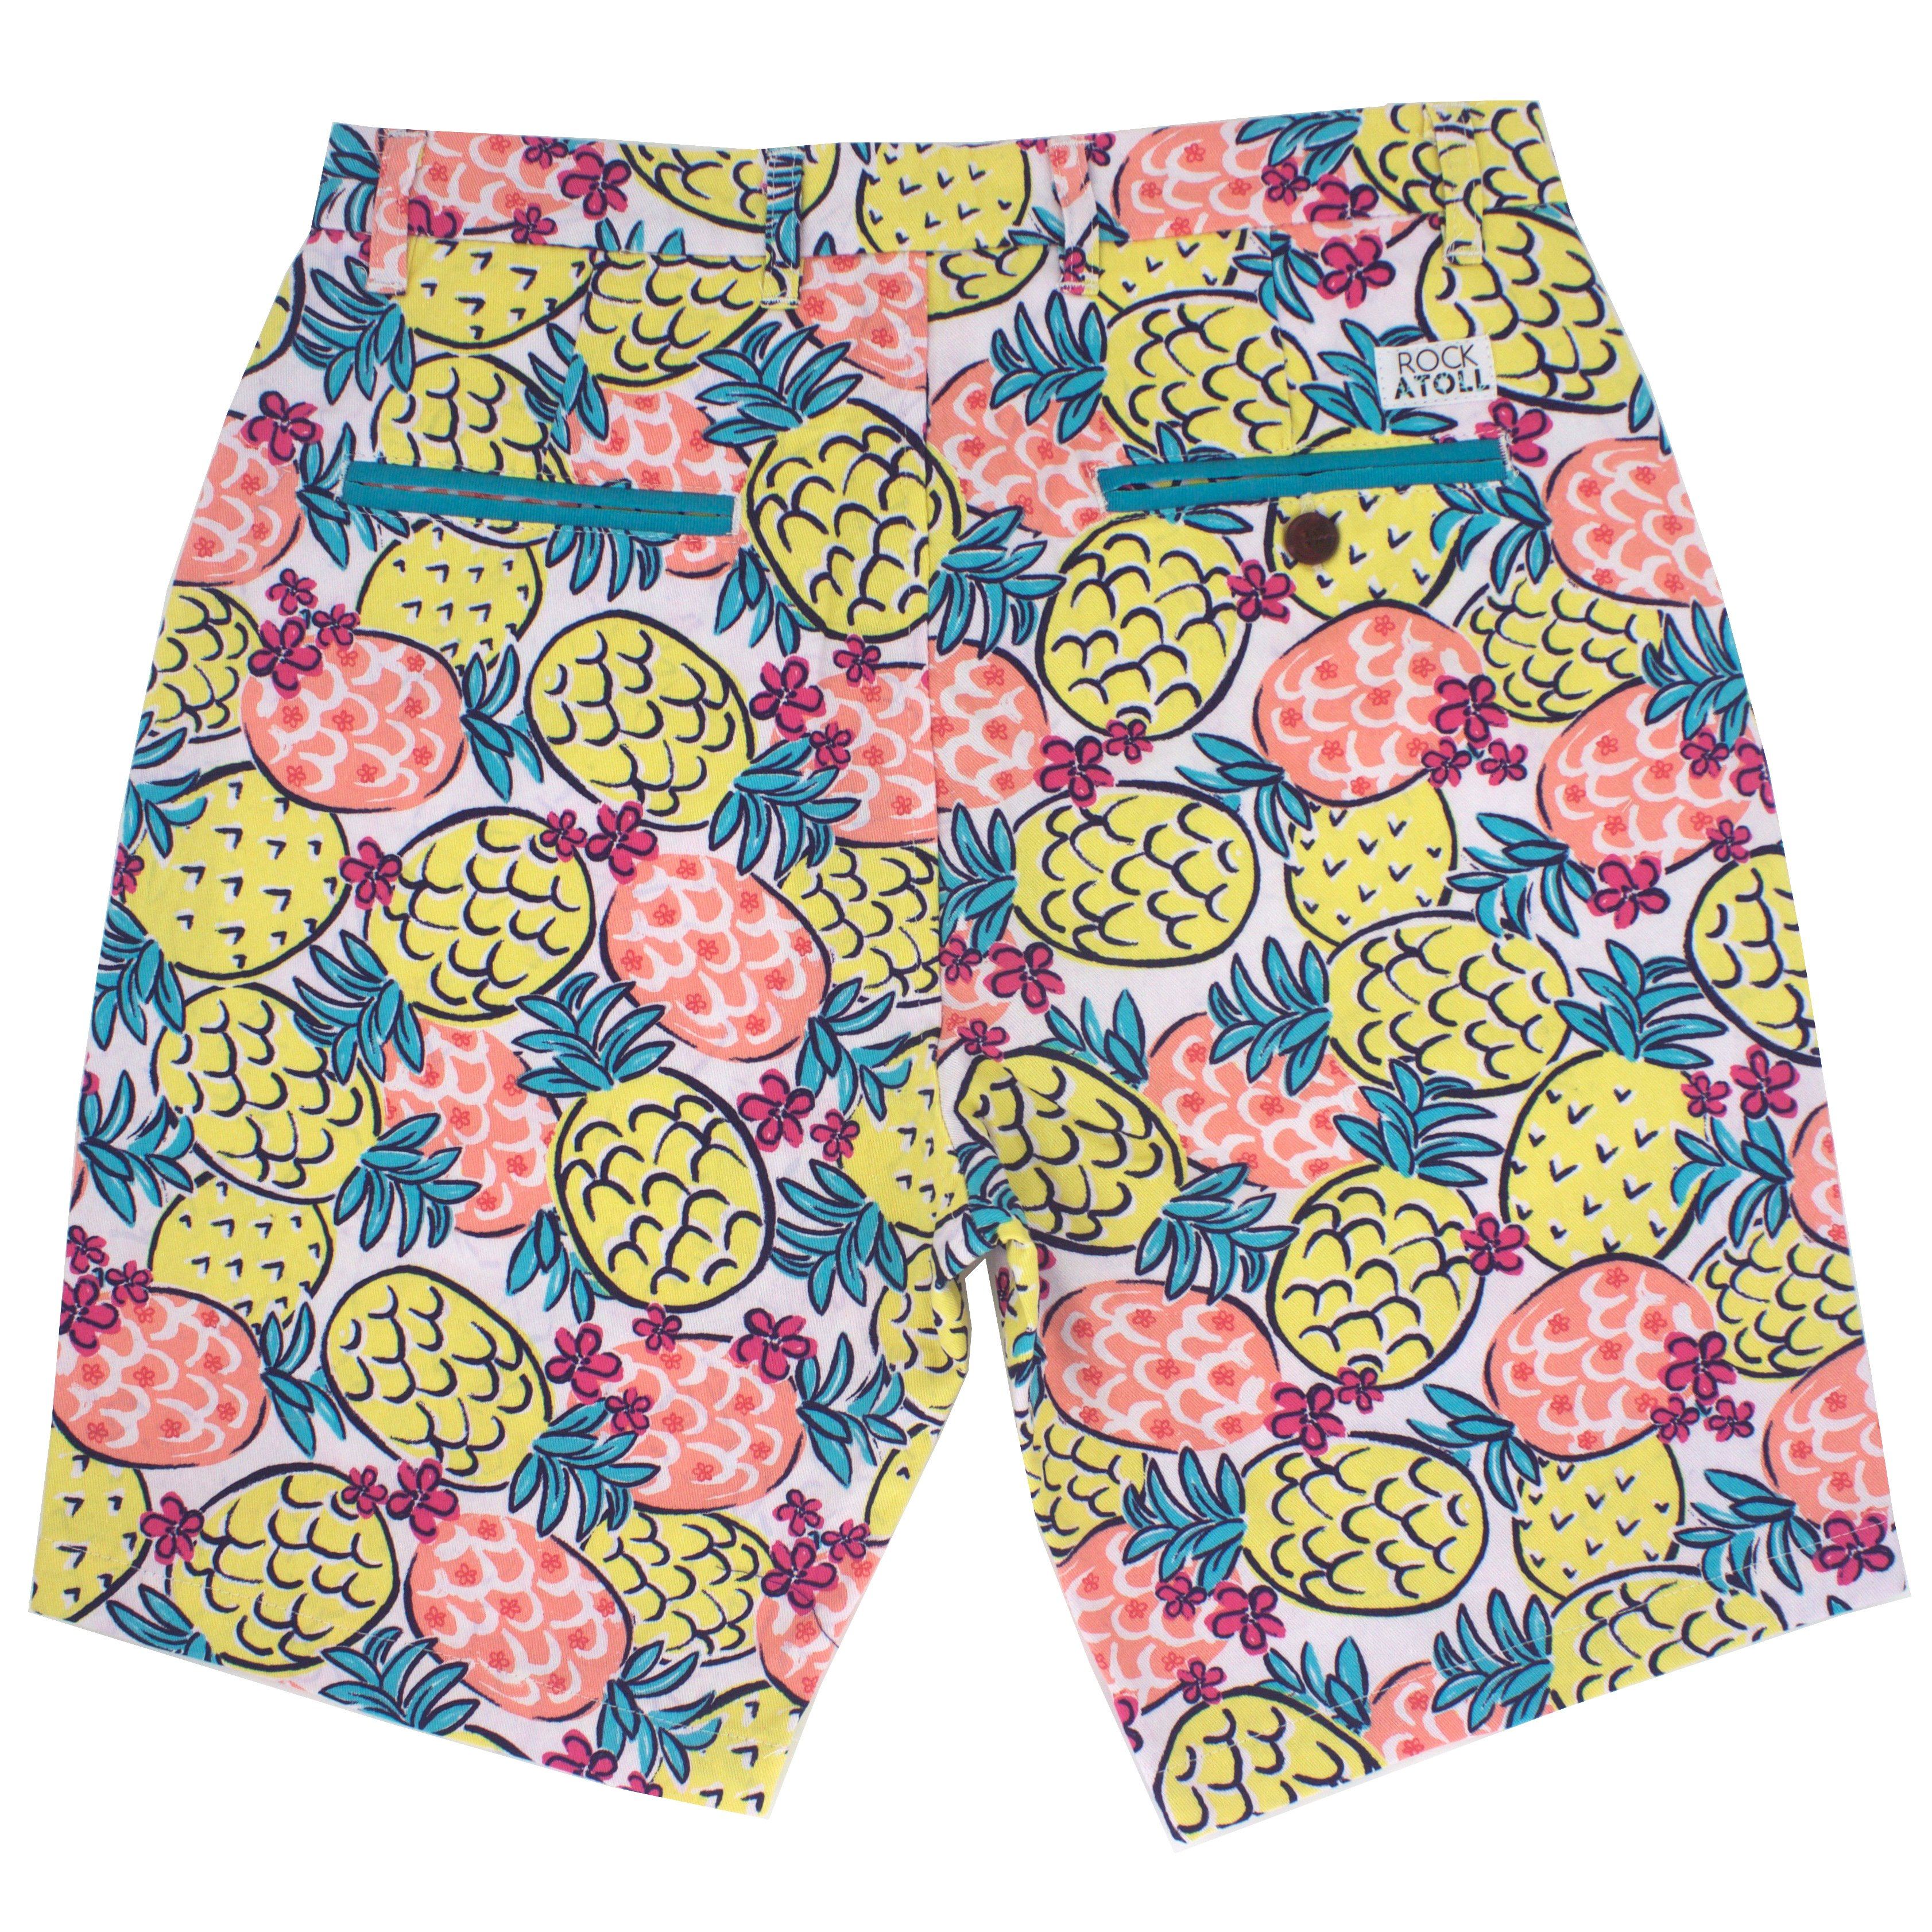 Bold Tropical Fruity Pineapple Patterned Shorts for Men